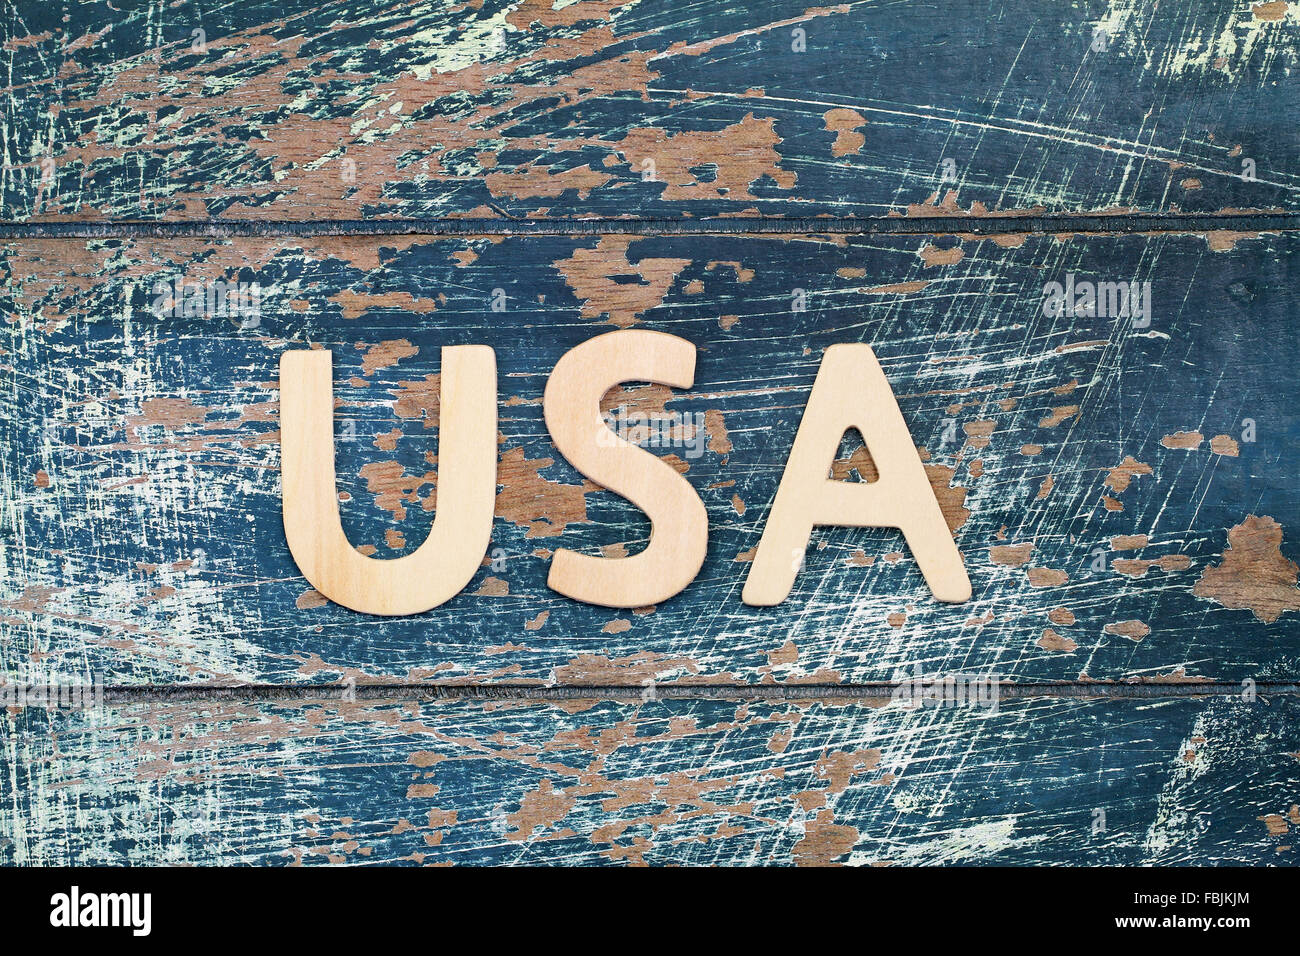 USA written with wooden letters on rustic surface Stock Photo